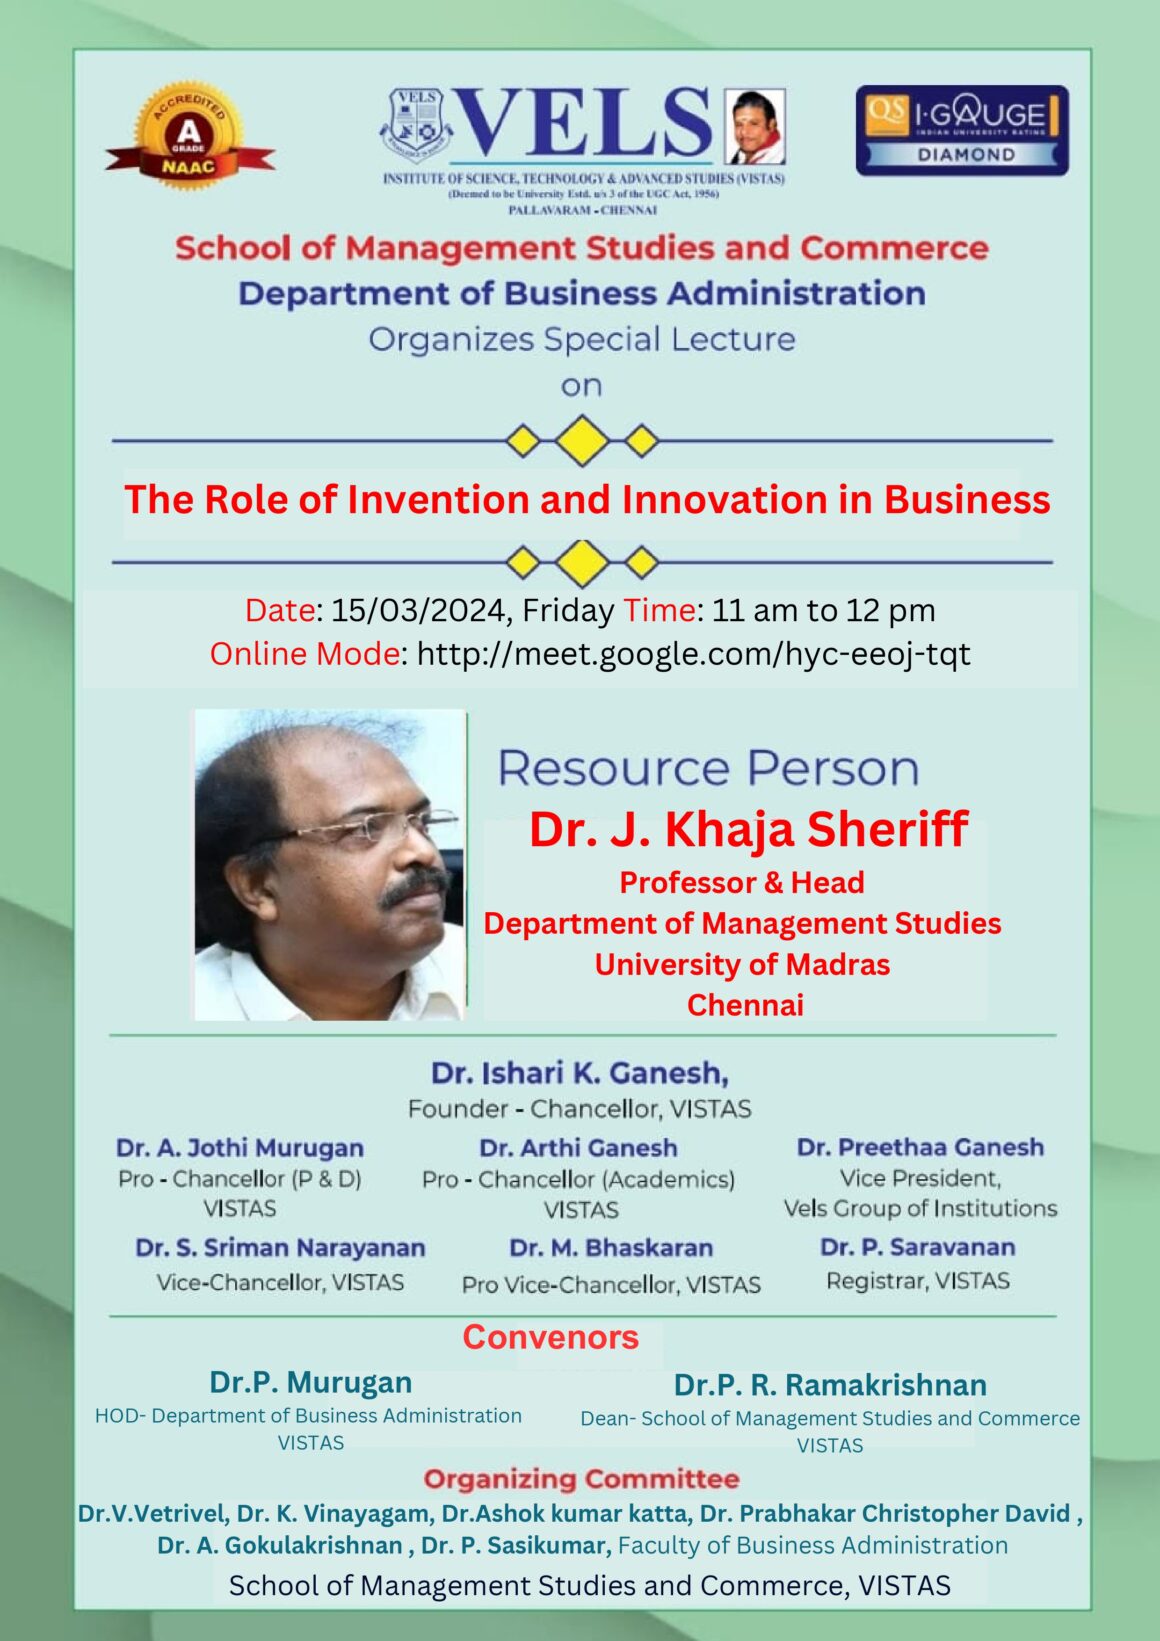 The Role of Invention and Innovation in Business